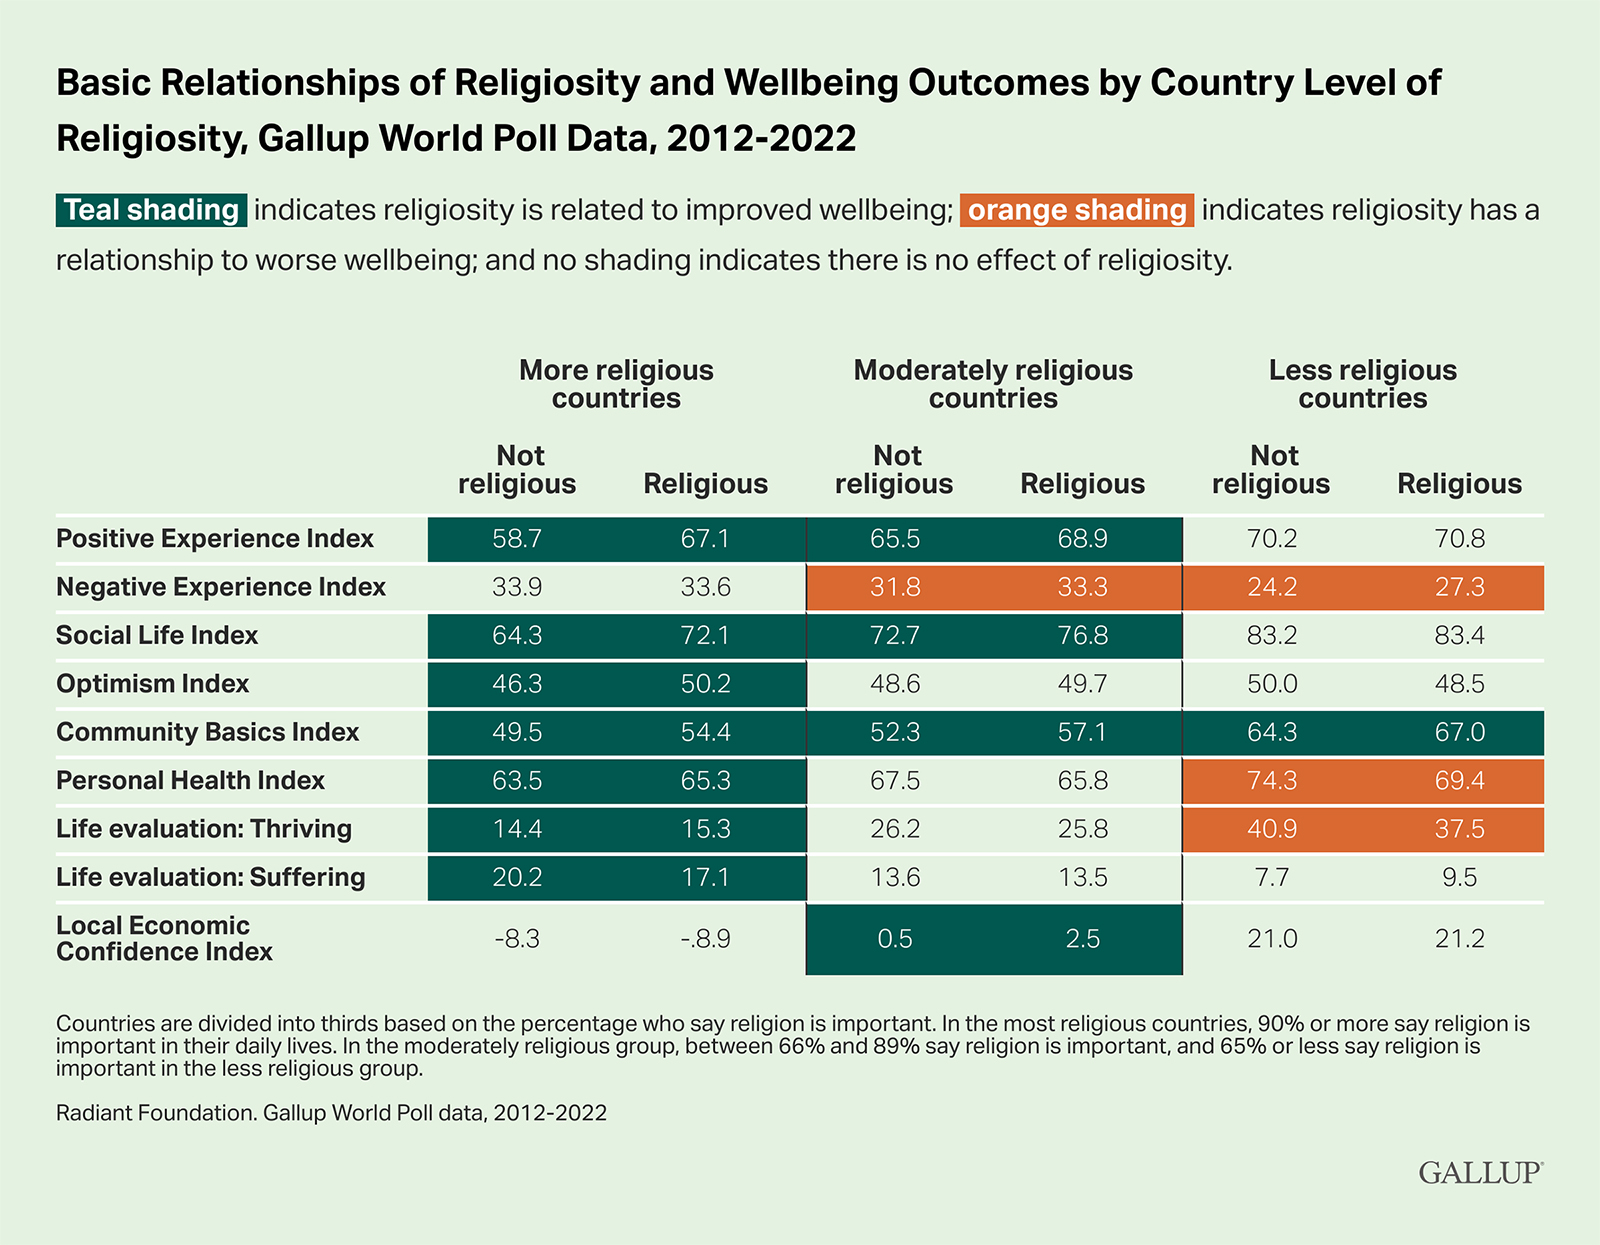 "Basic Relationships of Religiosity and Wellbeing Outcomes by Country Level of Religiosity, Gallup World Poll Data, 2012-2022" Graphic courtesy Gallup